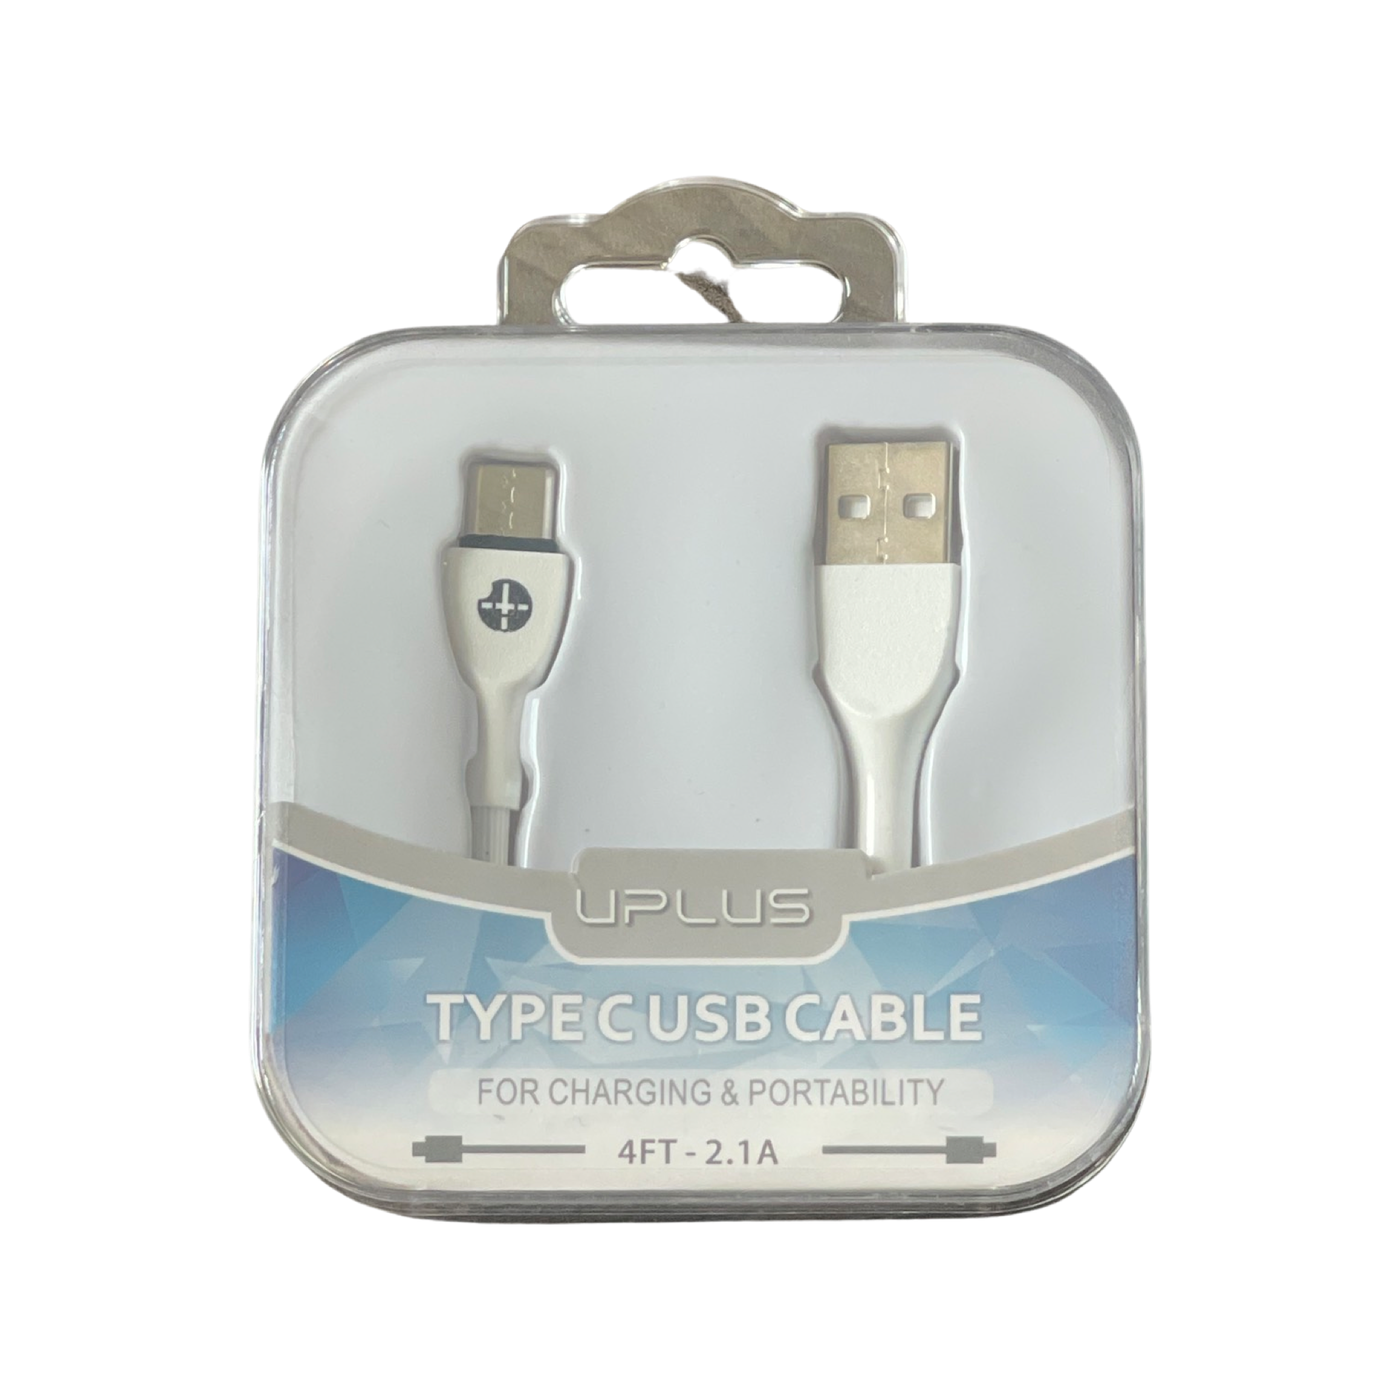 Type C USB cable (charge your device faster)